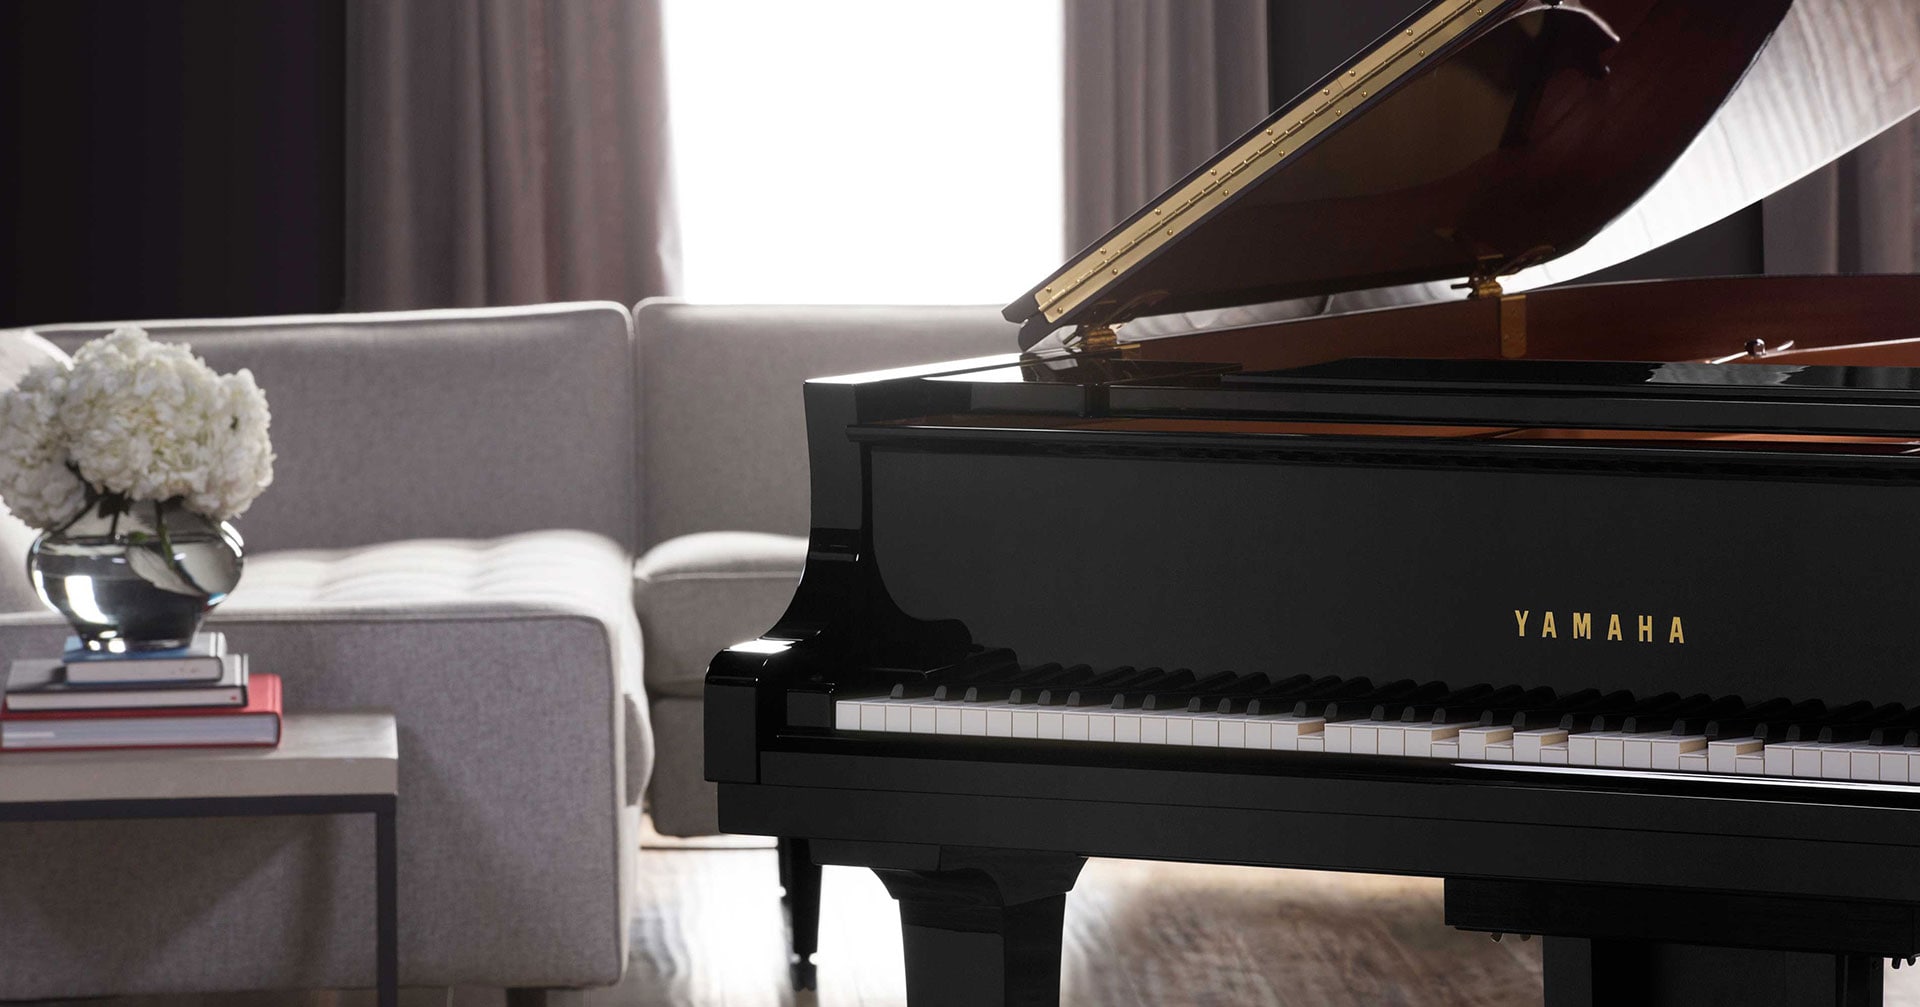 Lifestyle picture of Yamaha Disklavier piano